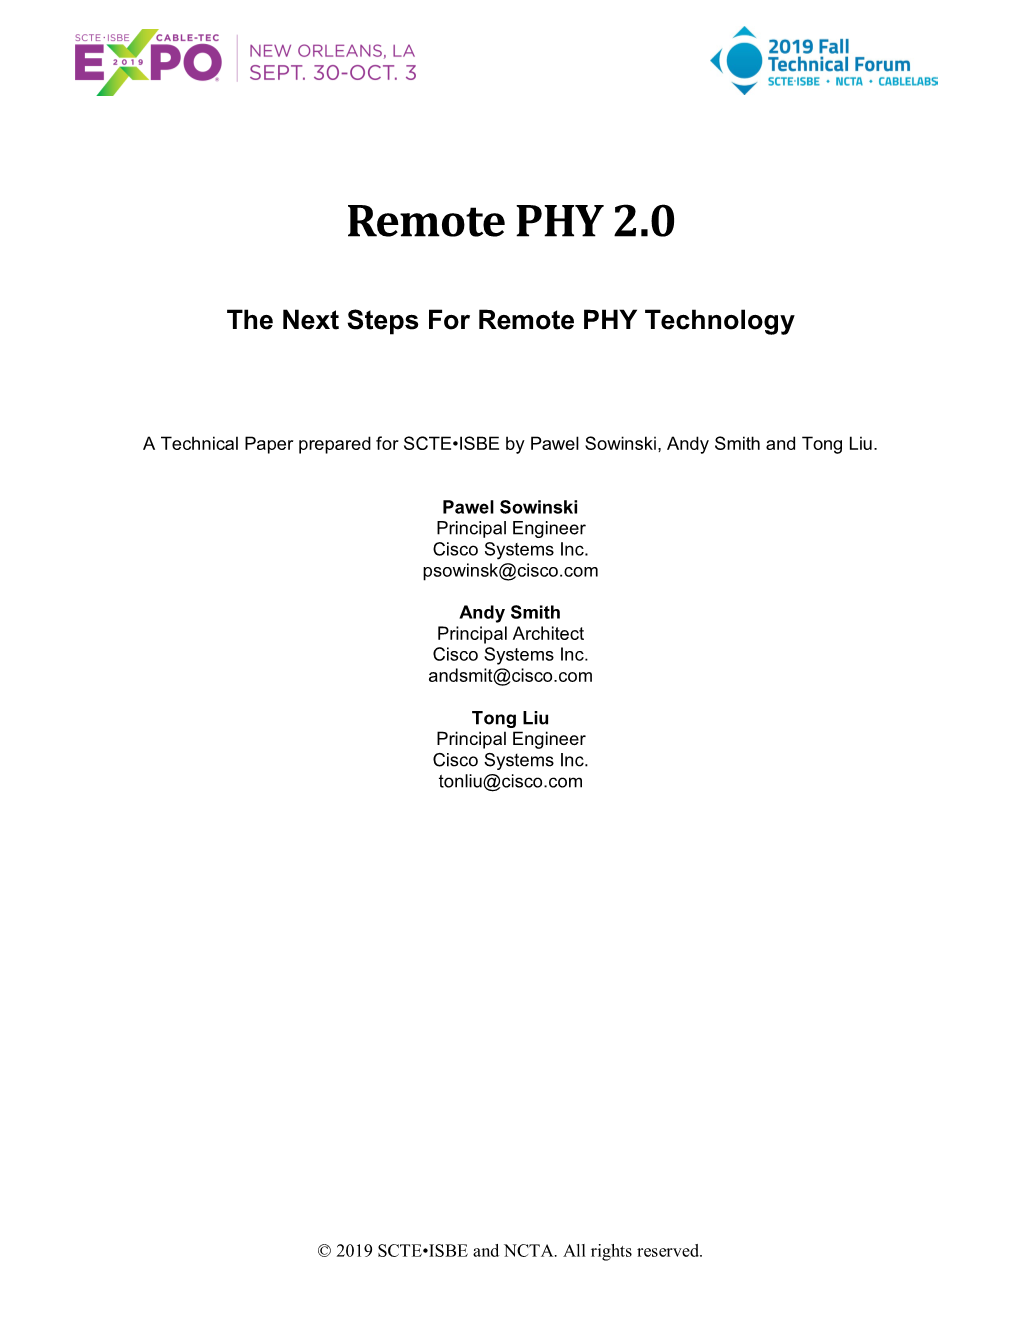 Remote PHY 2.0